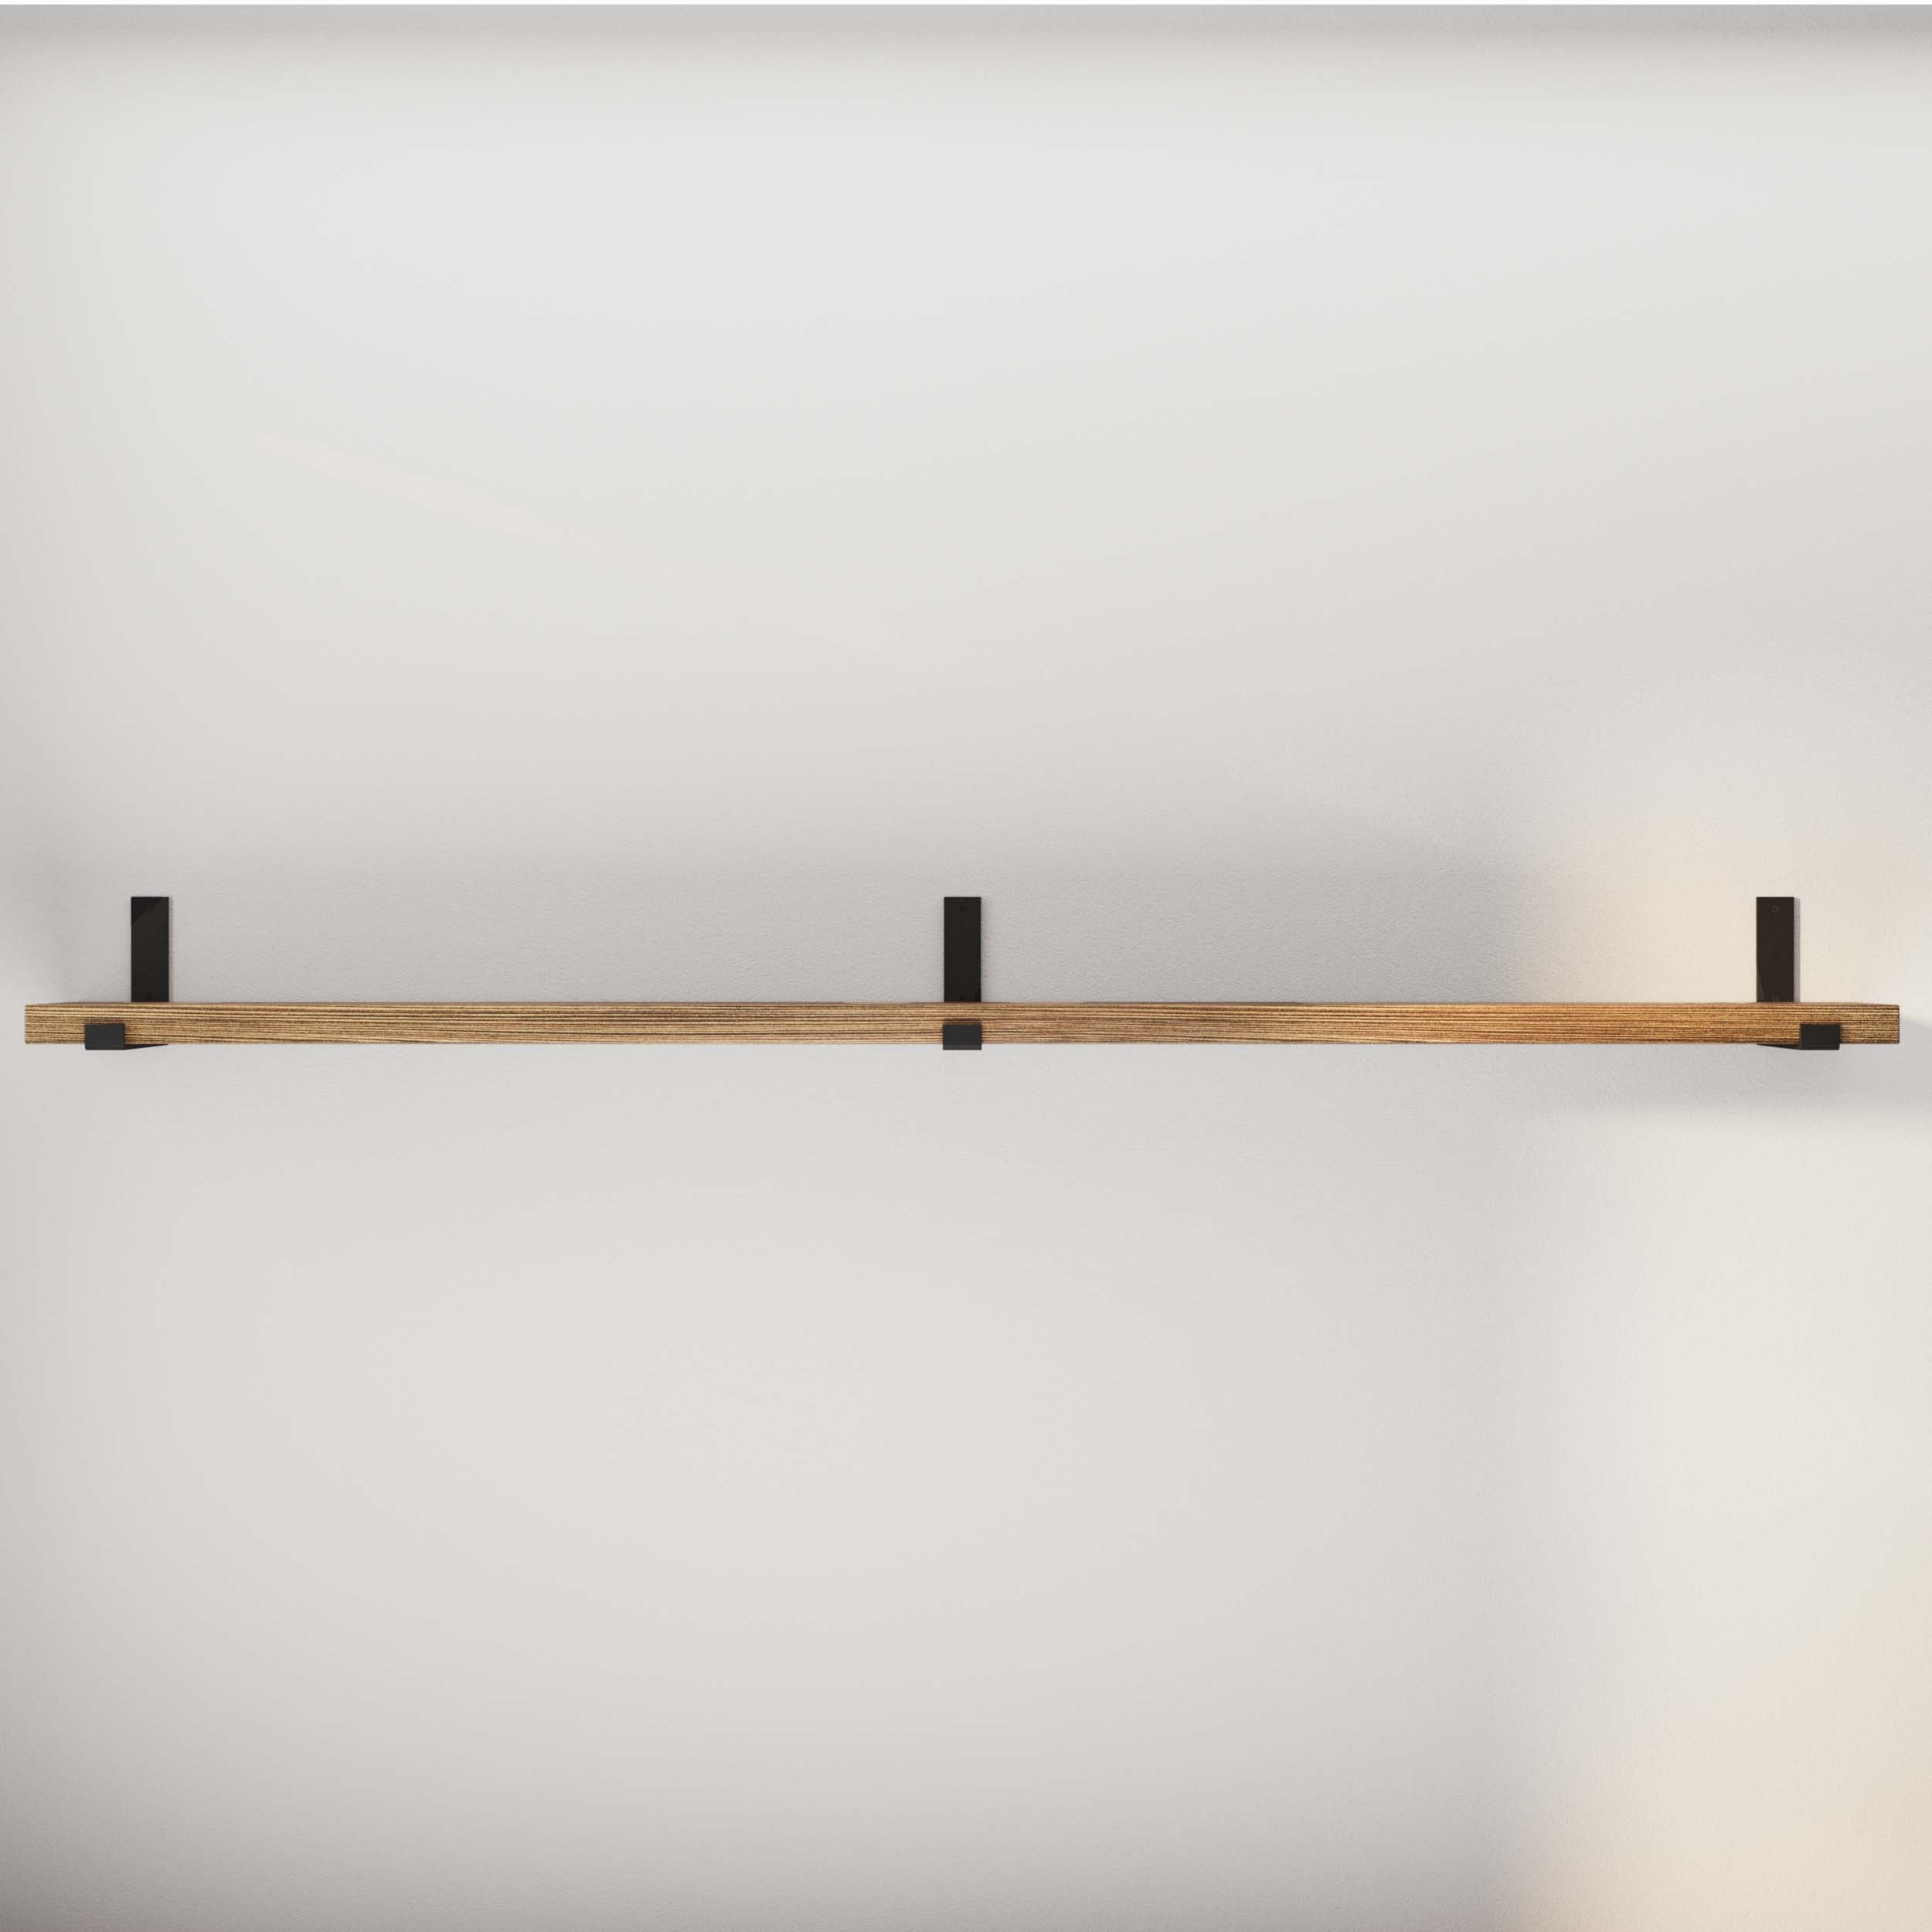 An empty wooden shelf mounted on a white wall.